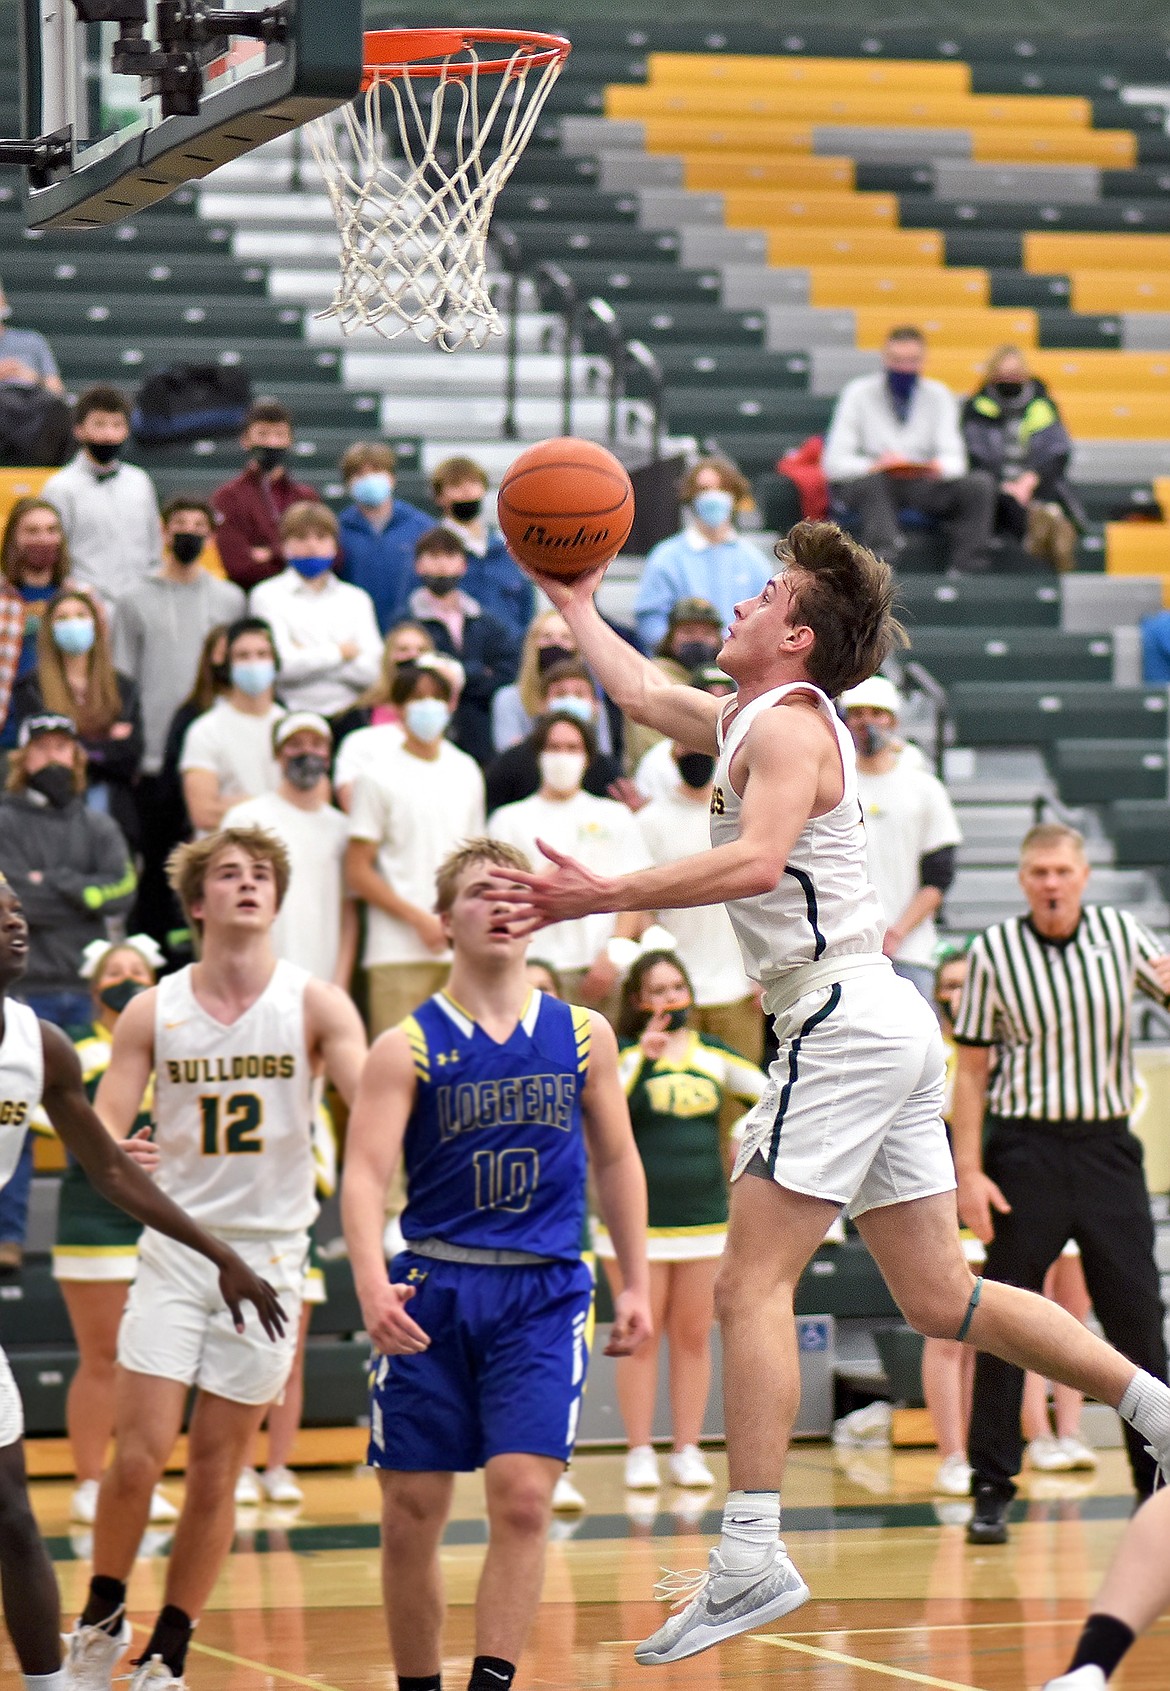 Whitefish's Bodie Smith finds some room in the lane as he looks for a layup against Libby on Thursday. (Whitney England/Whitefish Pilot)